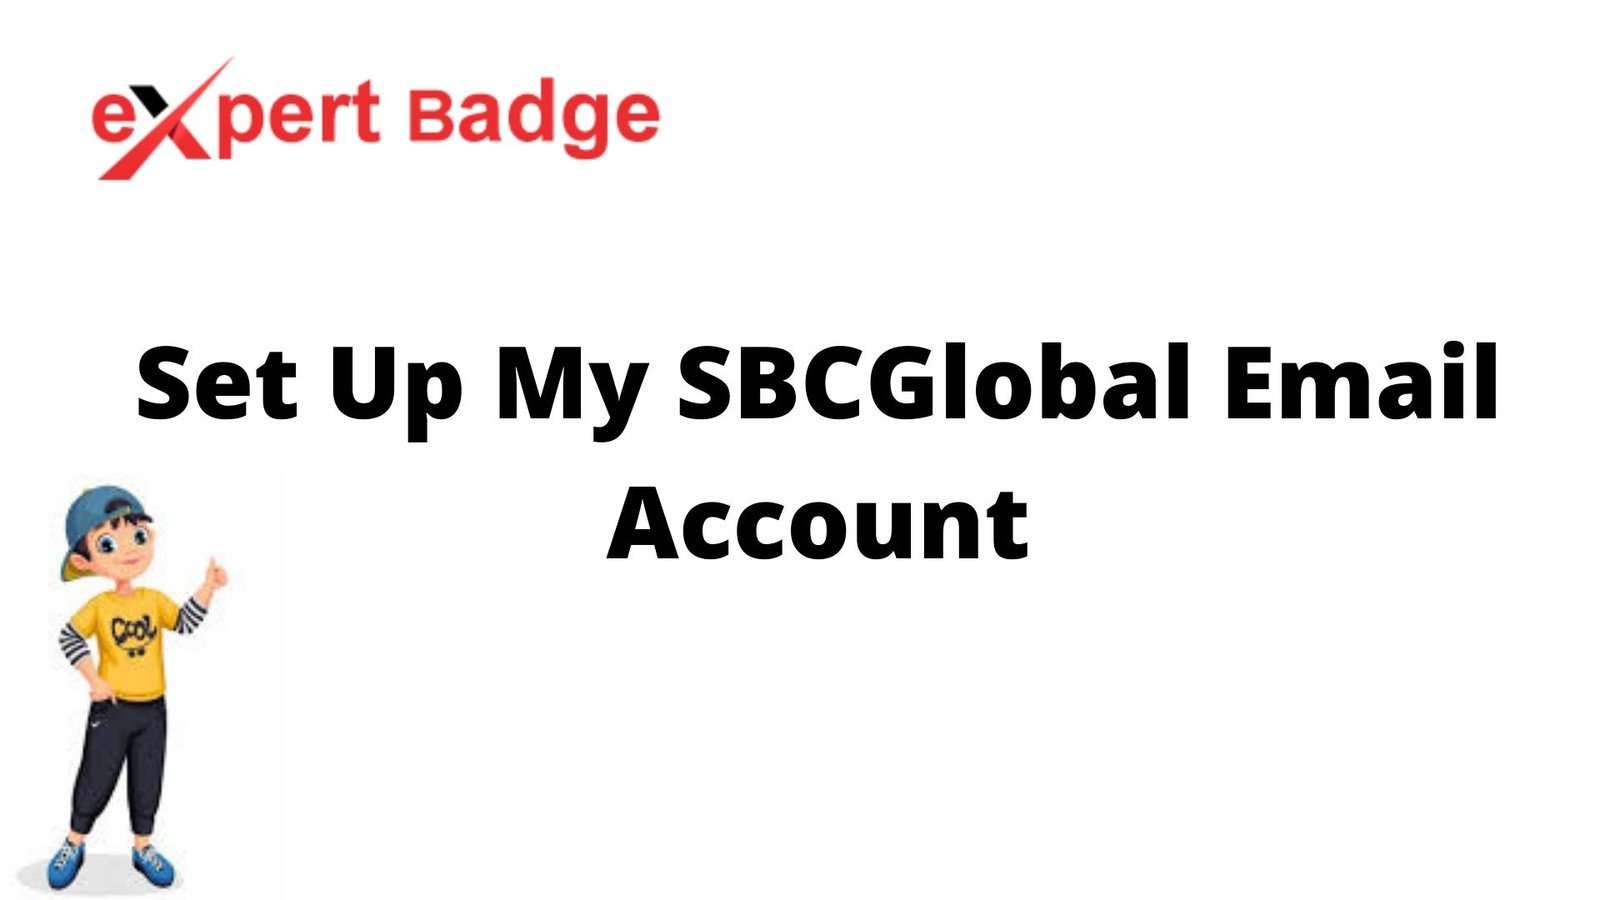 Set Up My SBCGlobal Email Account-ac1d8e08